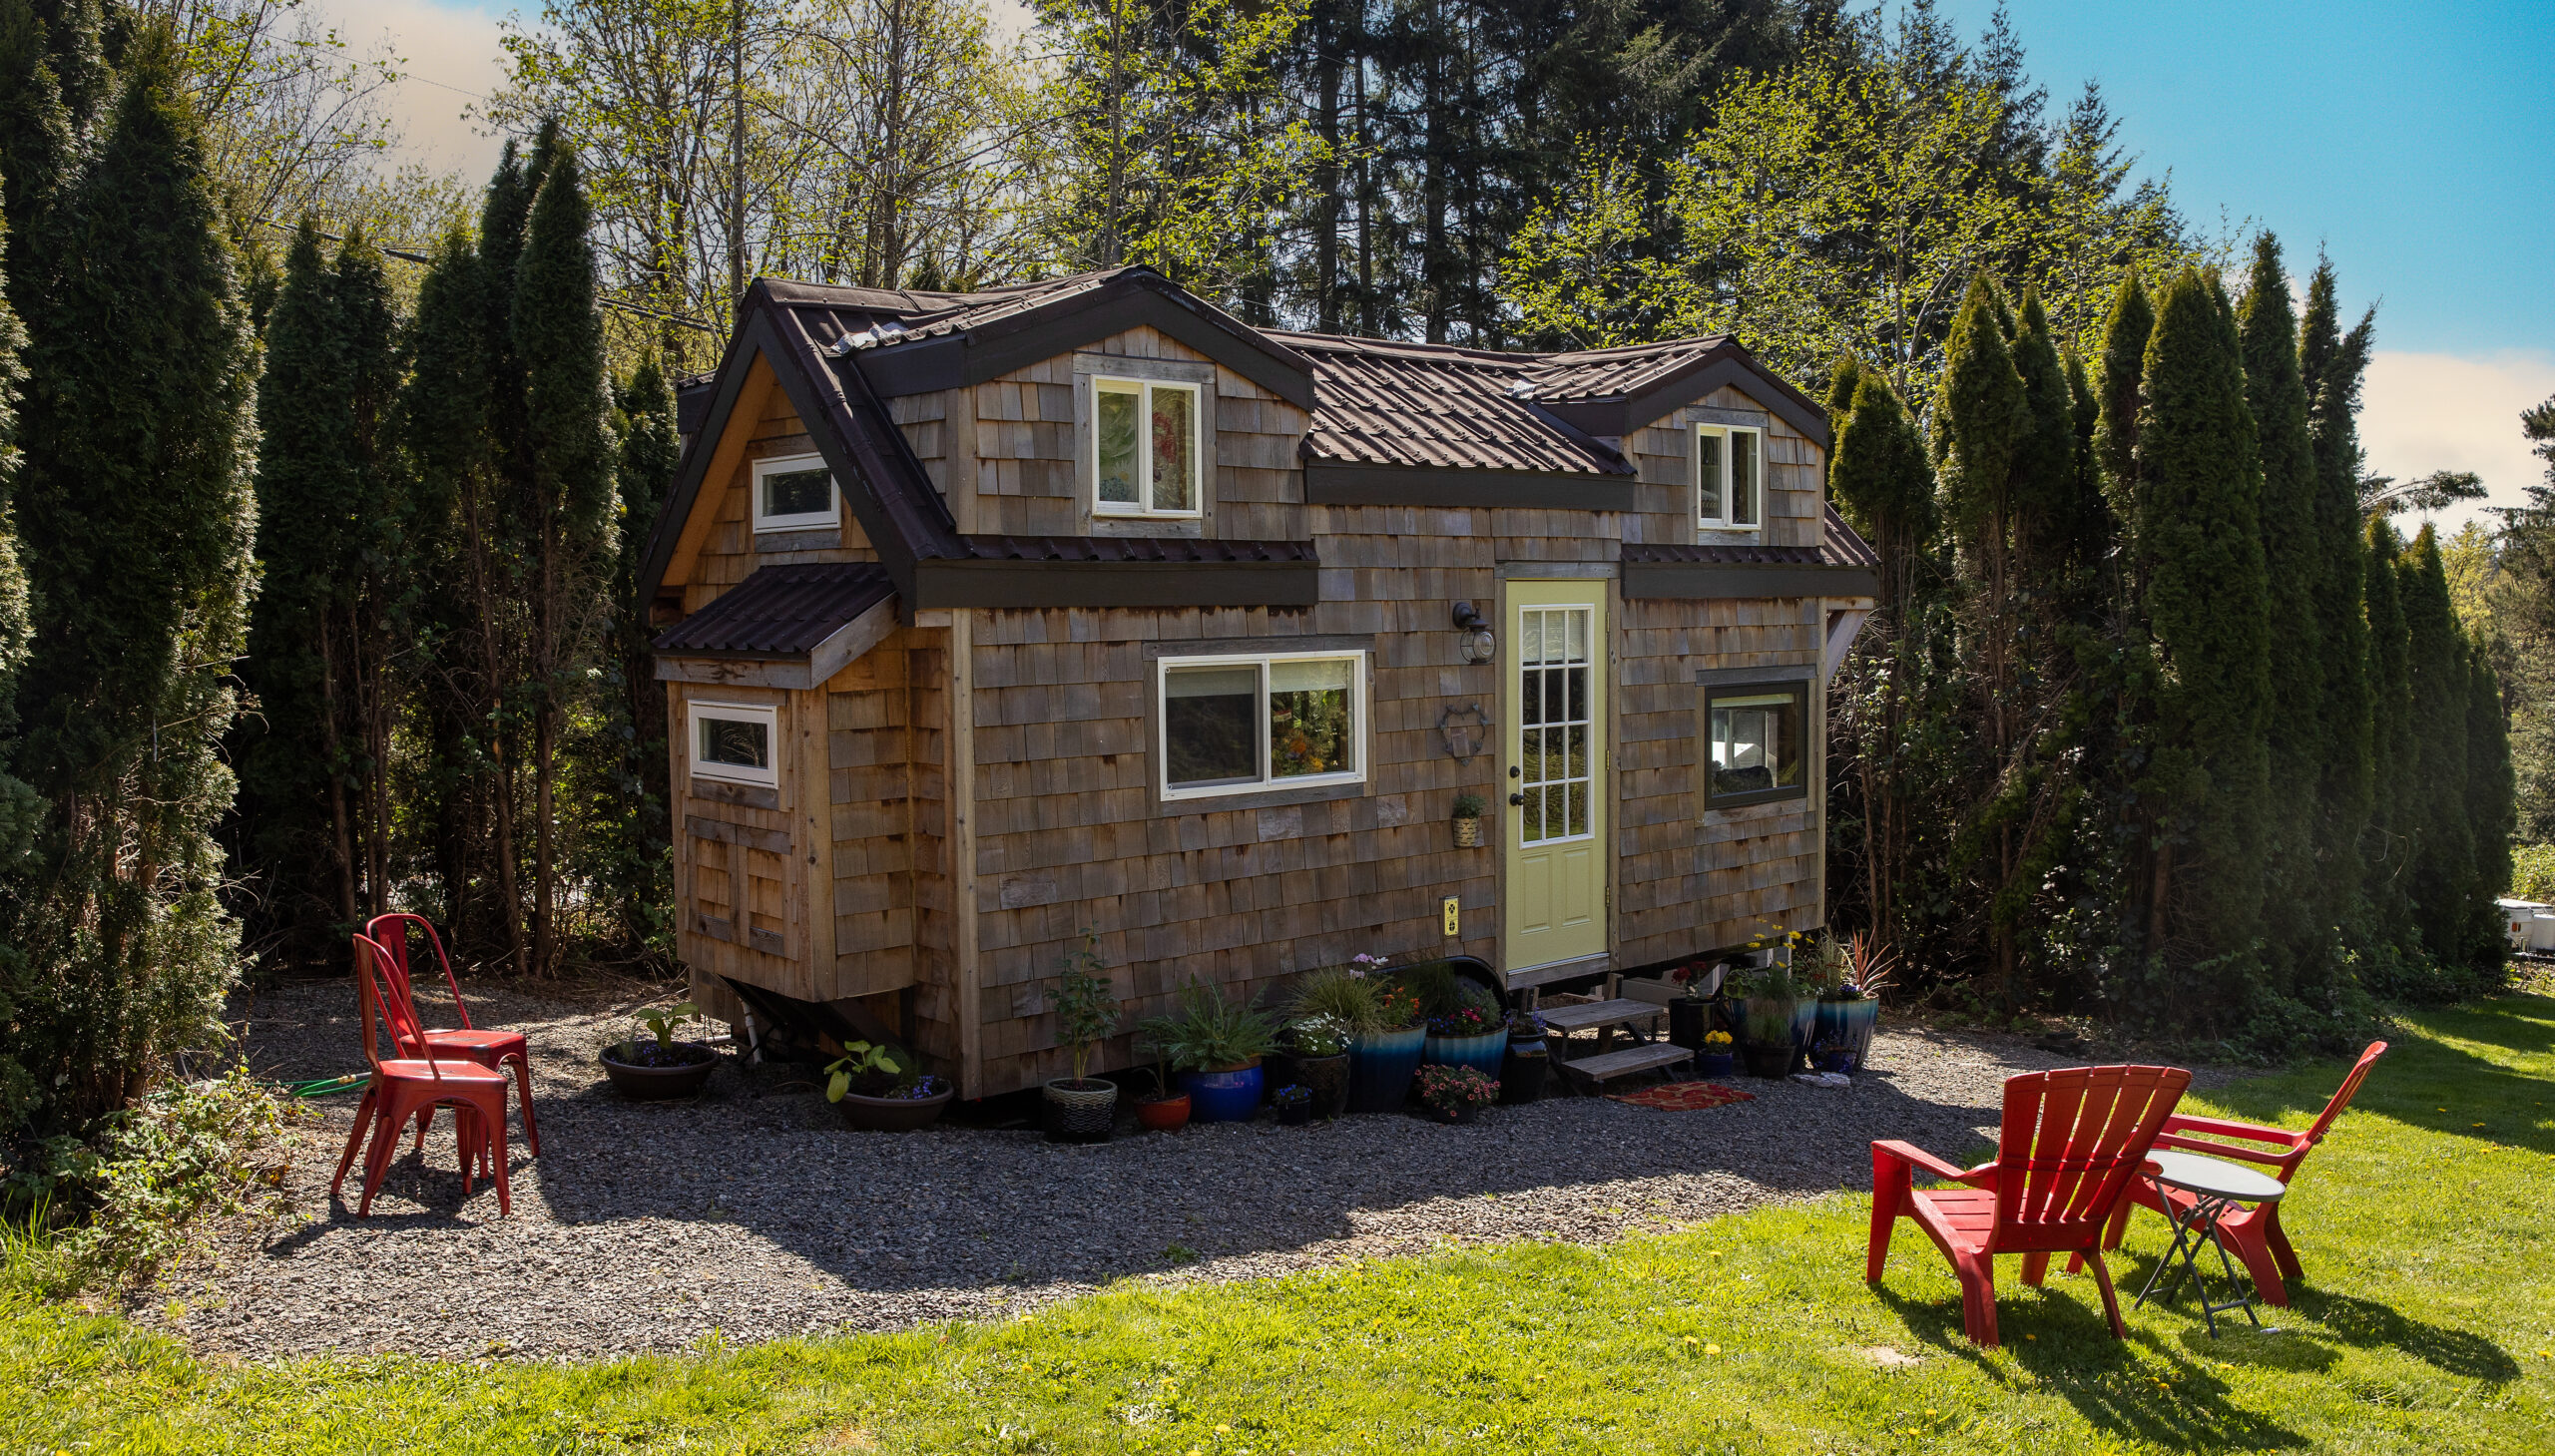 Cute little tiny home with wood paneling and privacy for a minimalist living experience